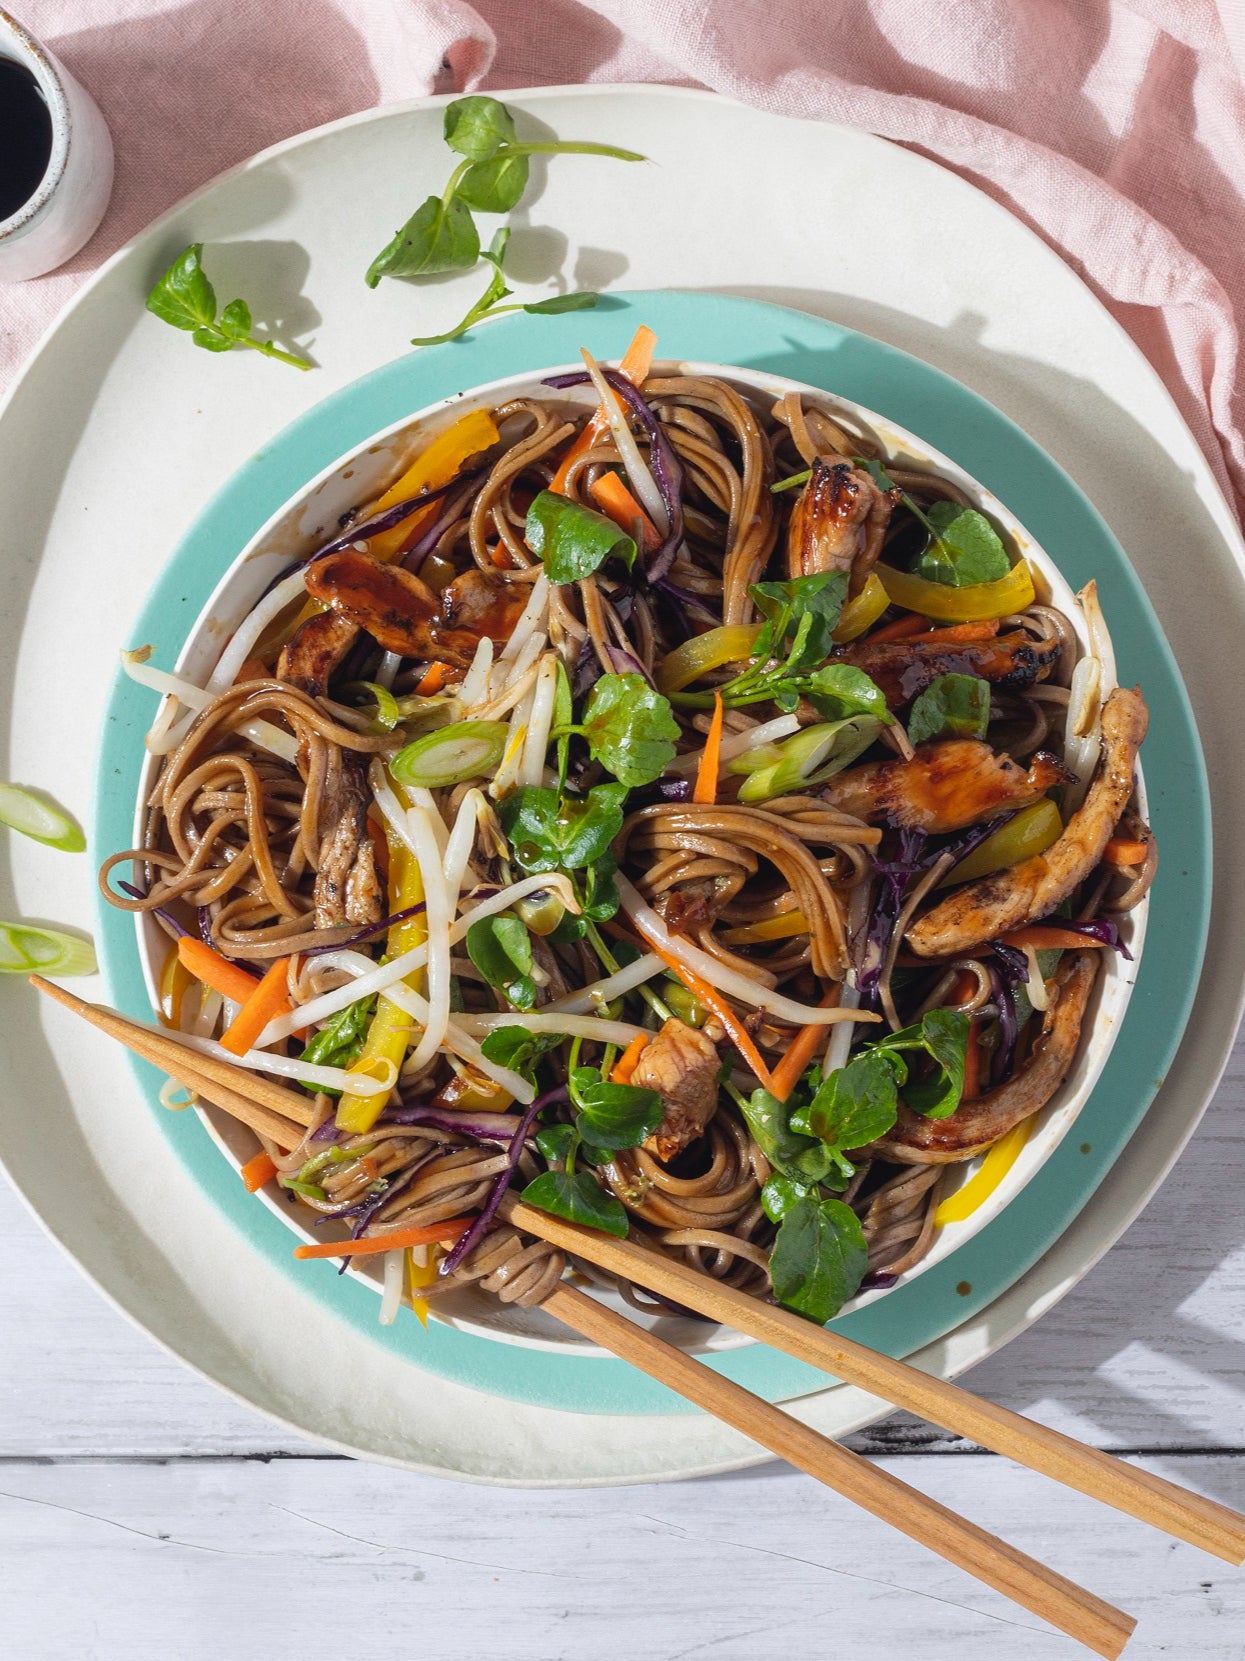 These colourful noodles don’t only look great, they taste great too